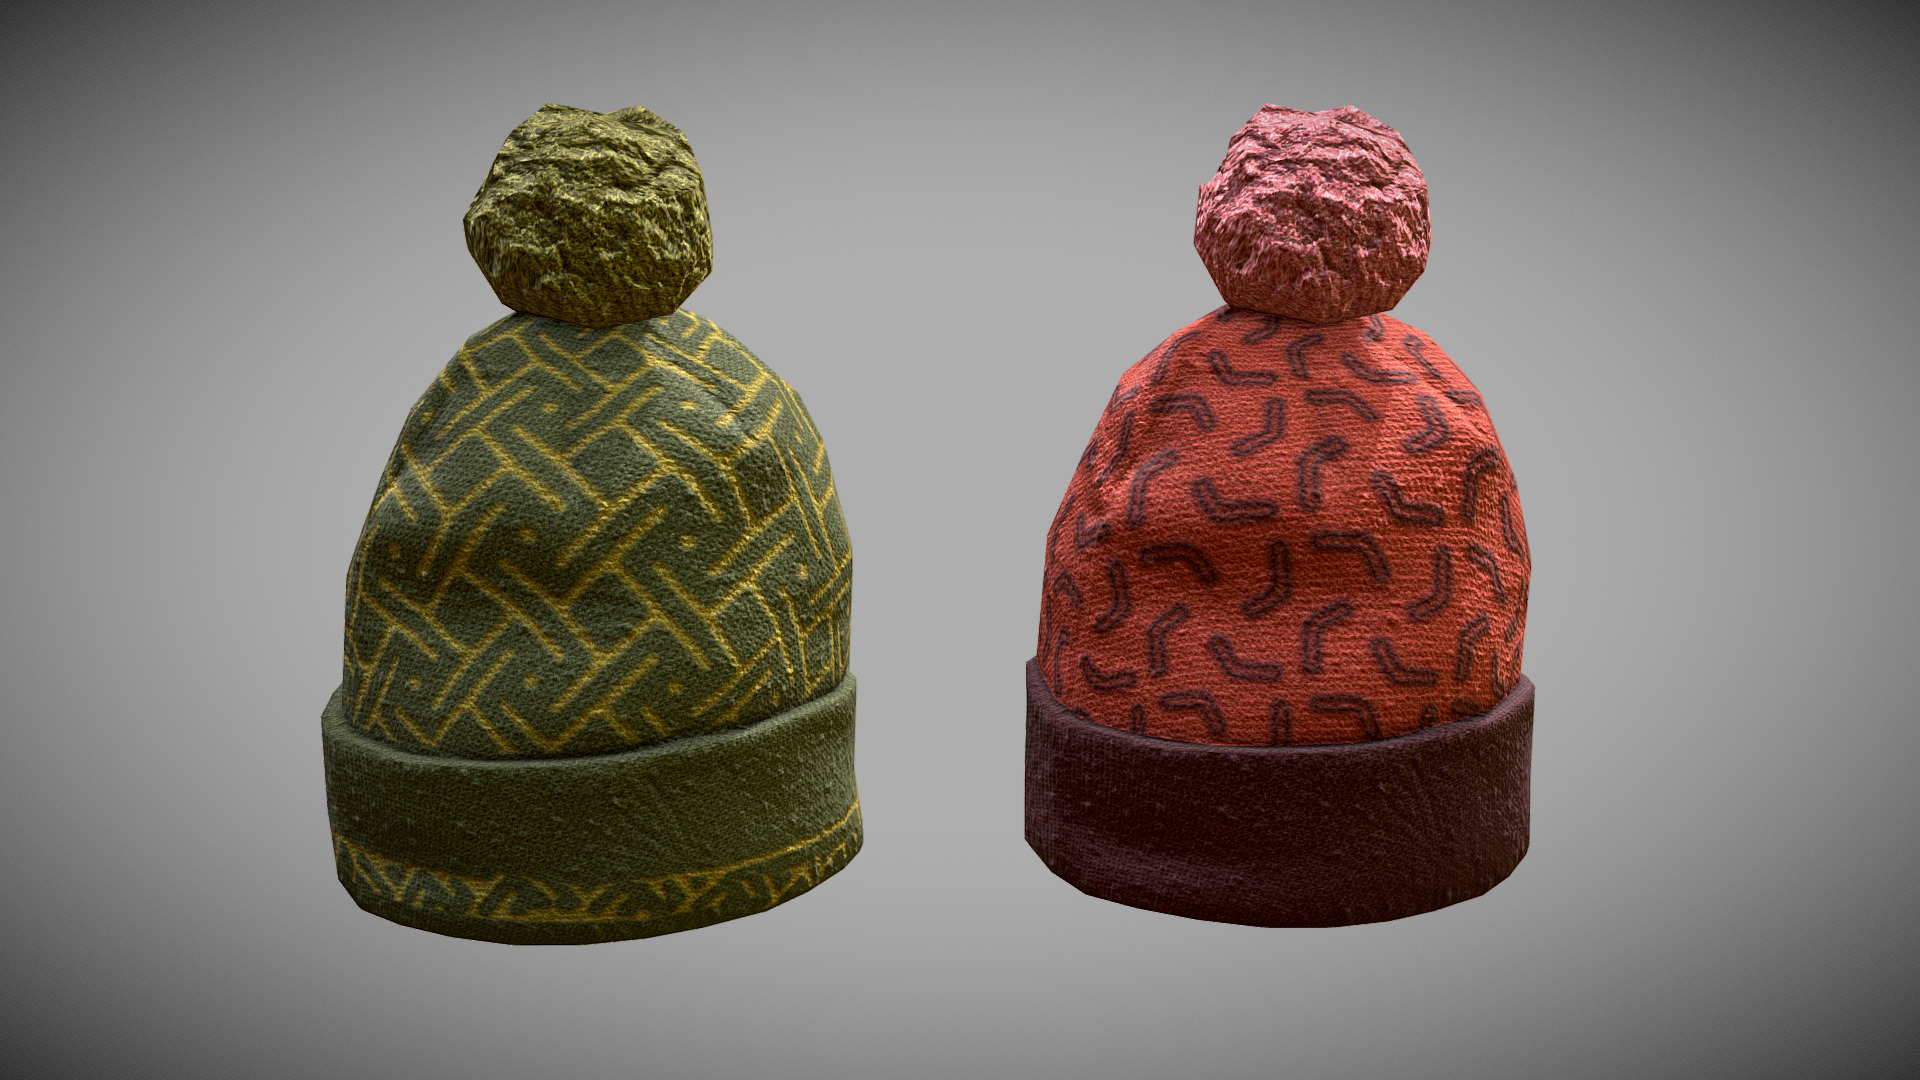 3D model Bobble hat – custom commission - This is a 3D model of the Bobble hat - custom commission. The 3D model is about a couple of knitted knitted hats.